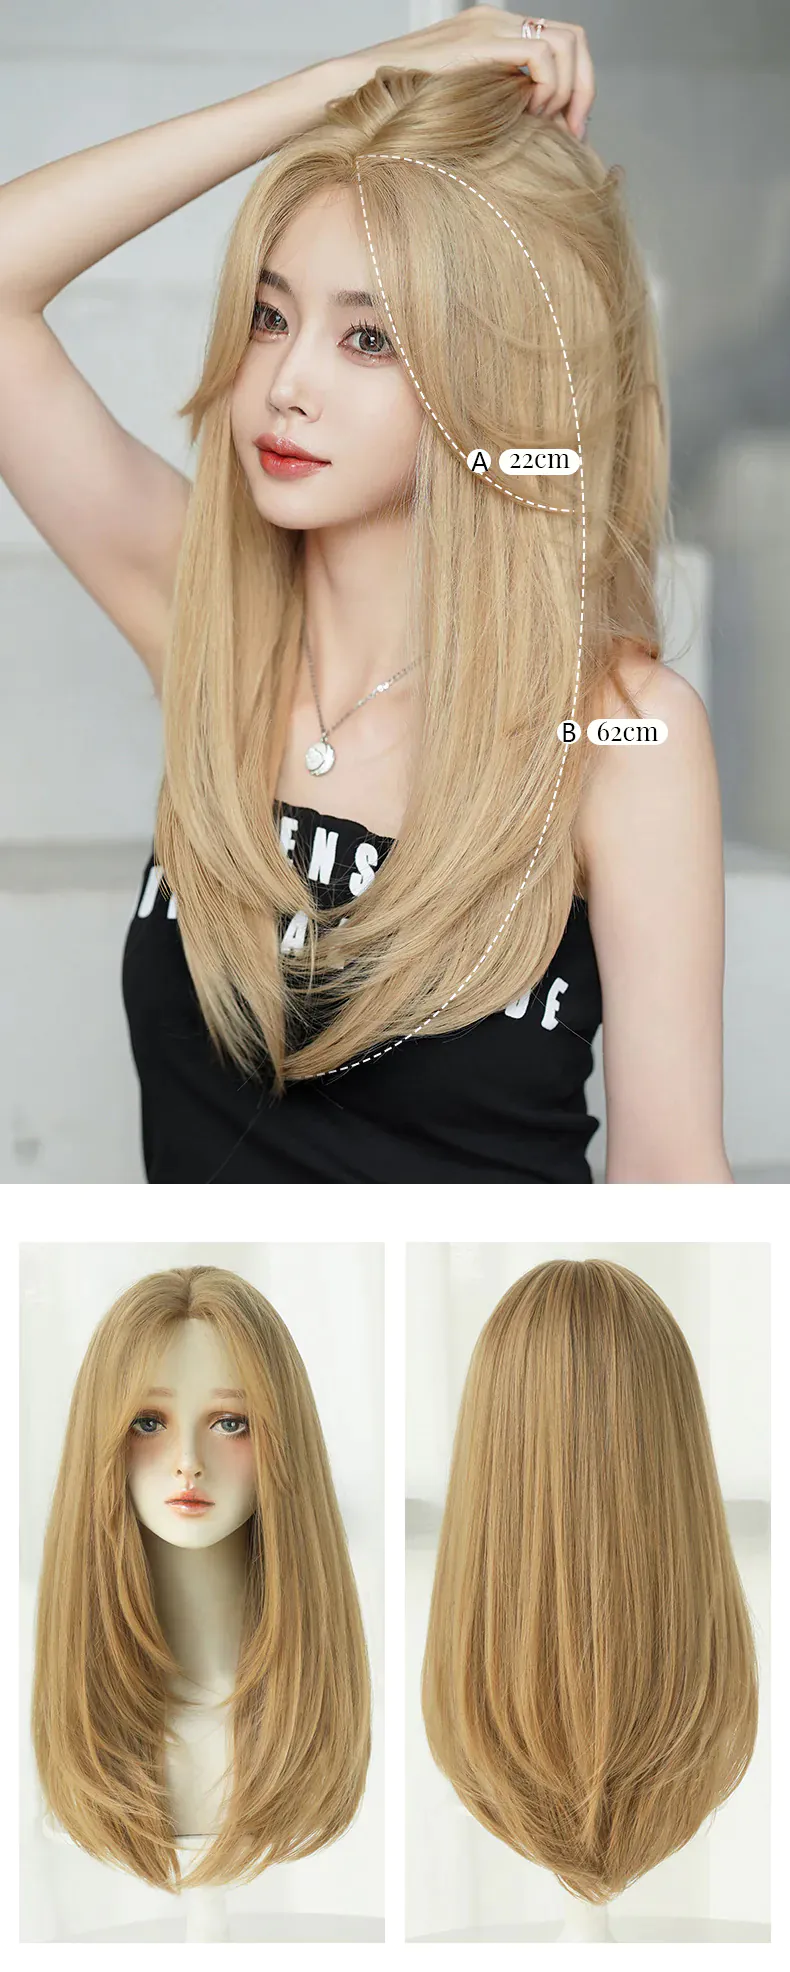 Women-Synthetic-Middle-Part-Long-Straight-Hair-Daily-Party-Wig10